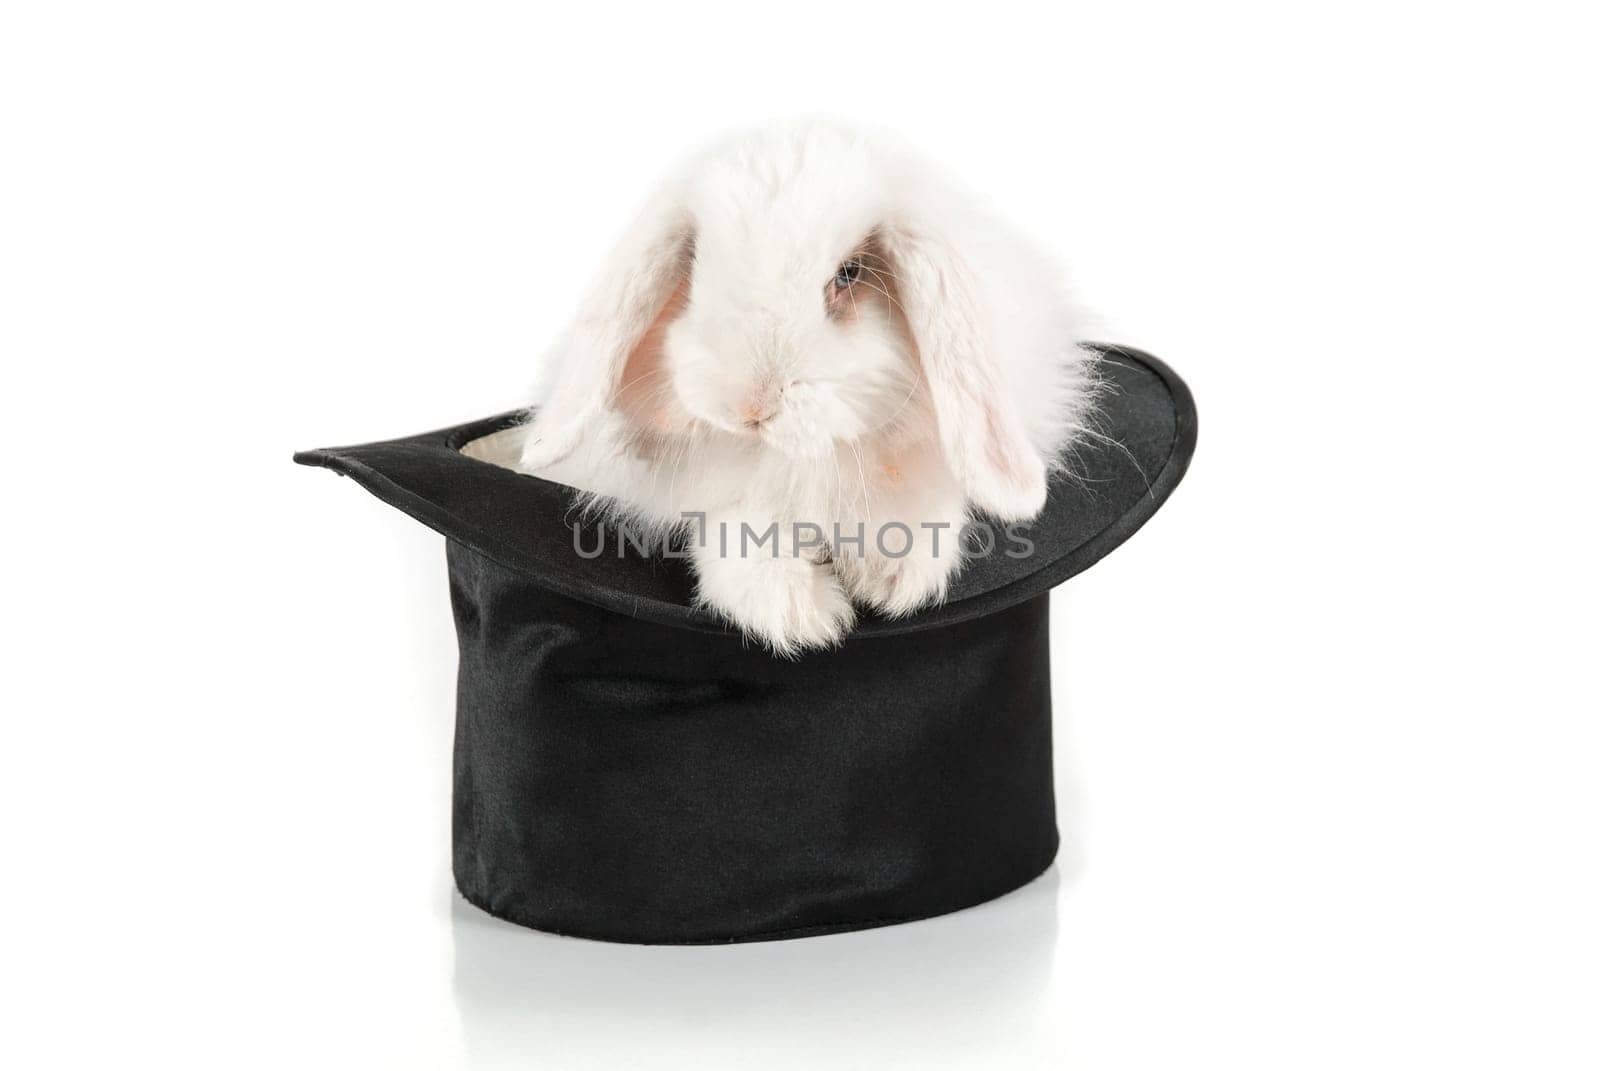 White rabbit at black hat isolated on a white background